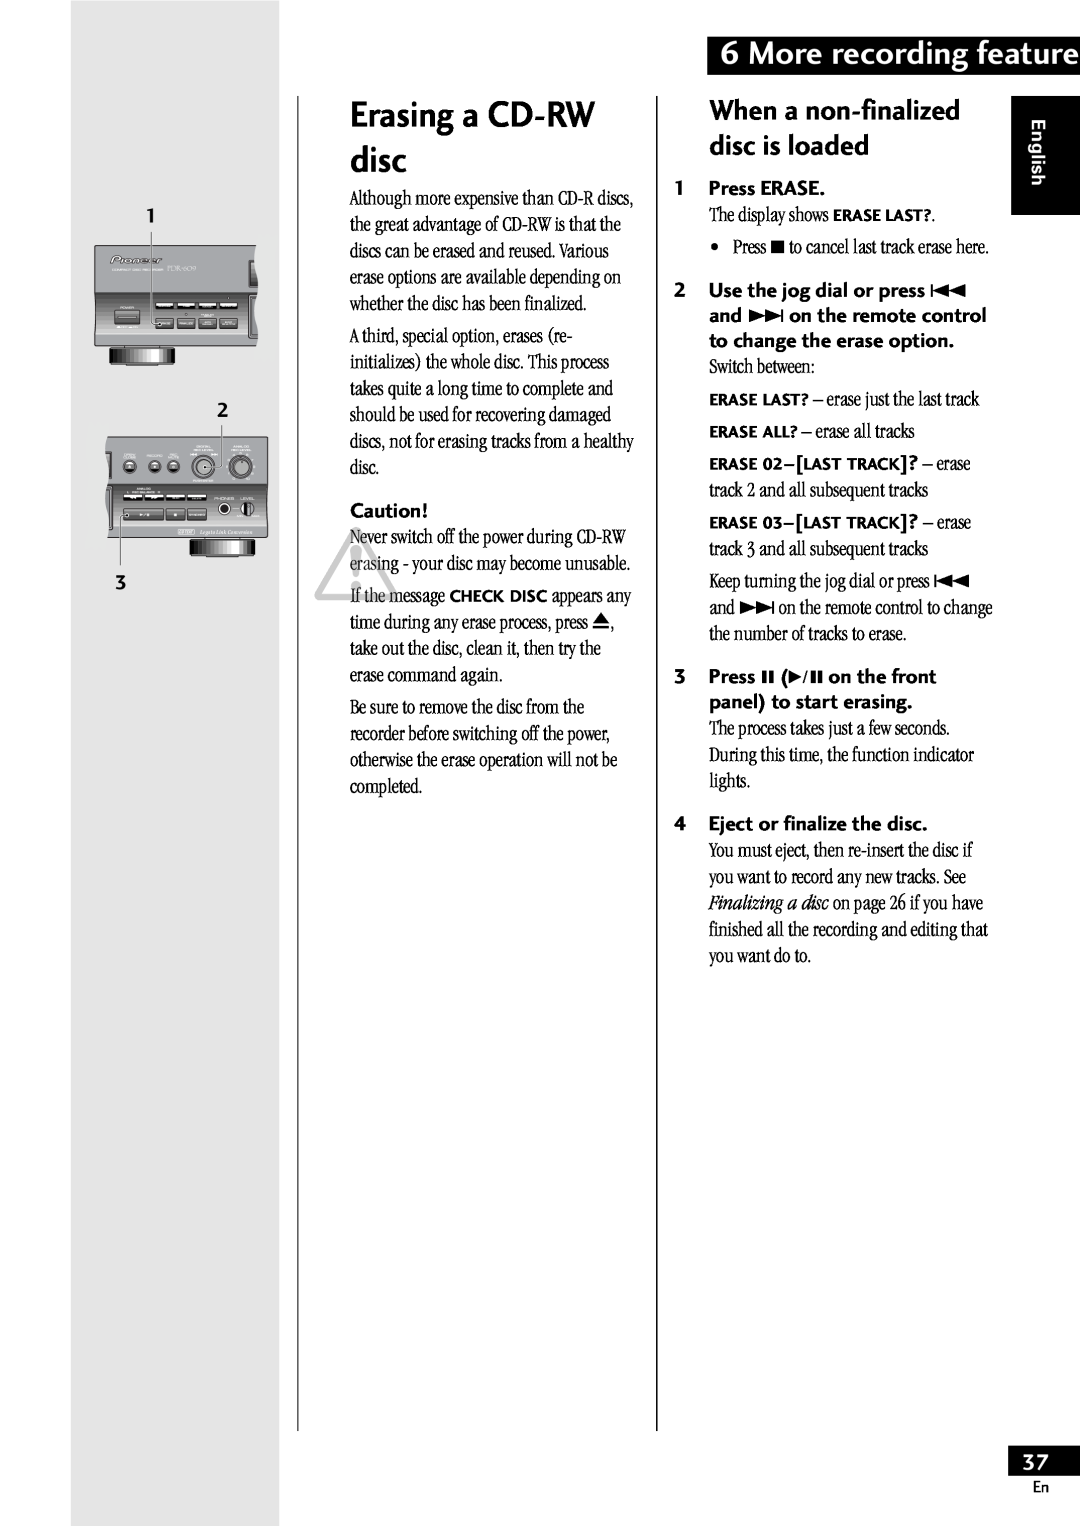 Pioneer PDR-609 operating instructions Erasing a CD-RWdisc, More recording feature, When a non-finalized, disc is loaded 